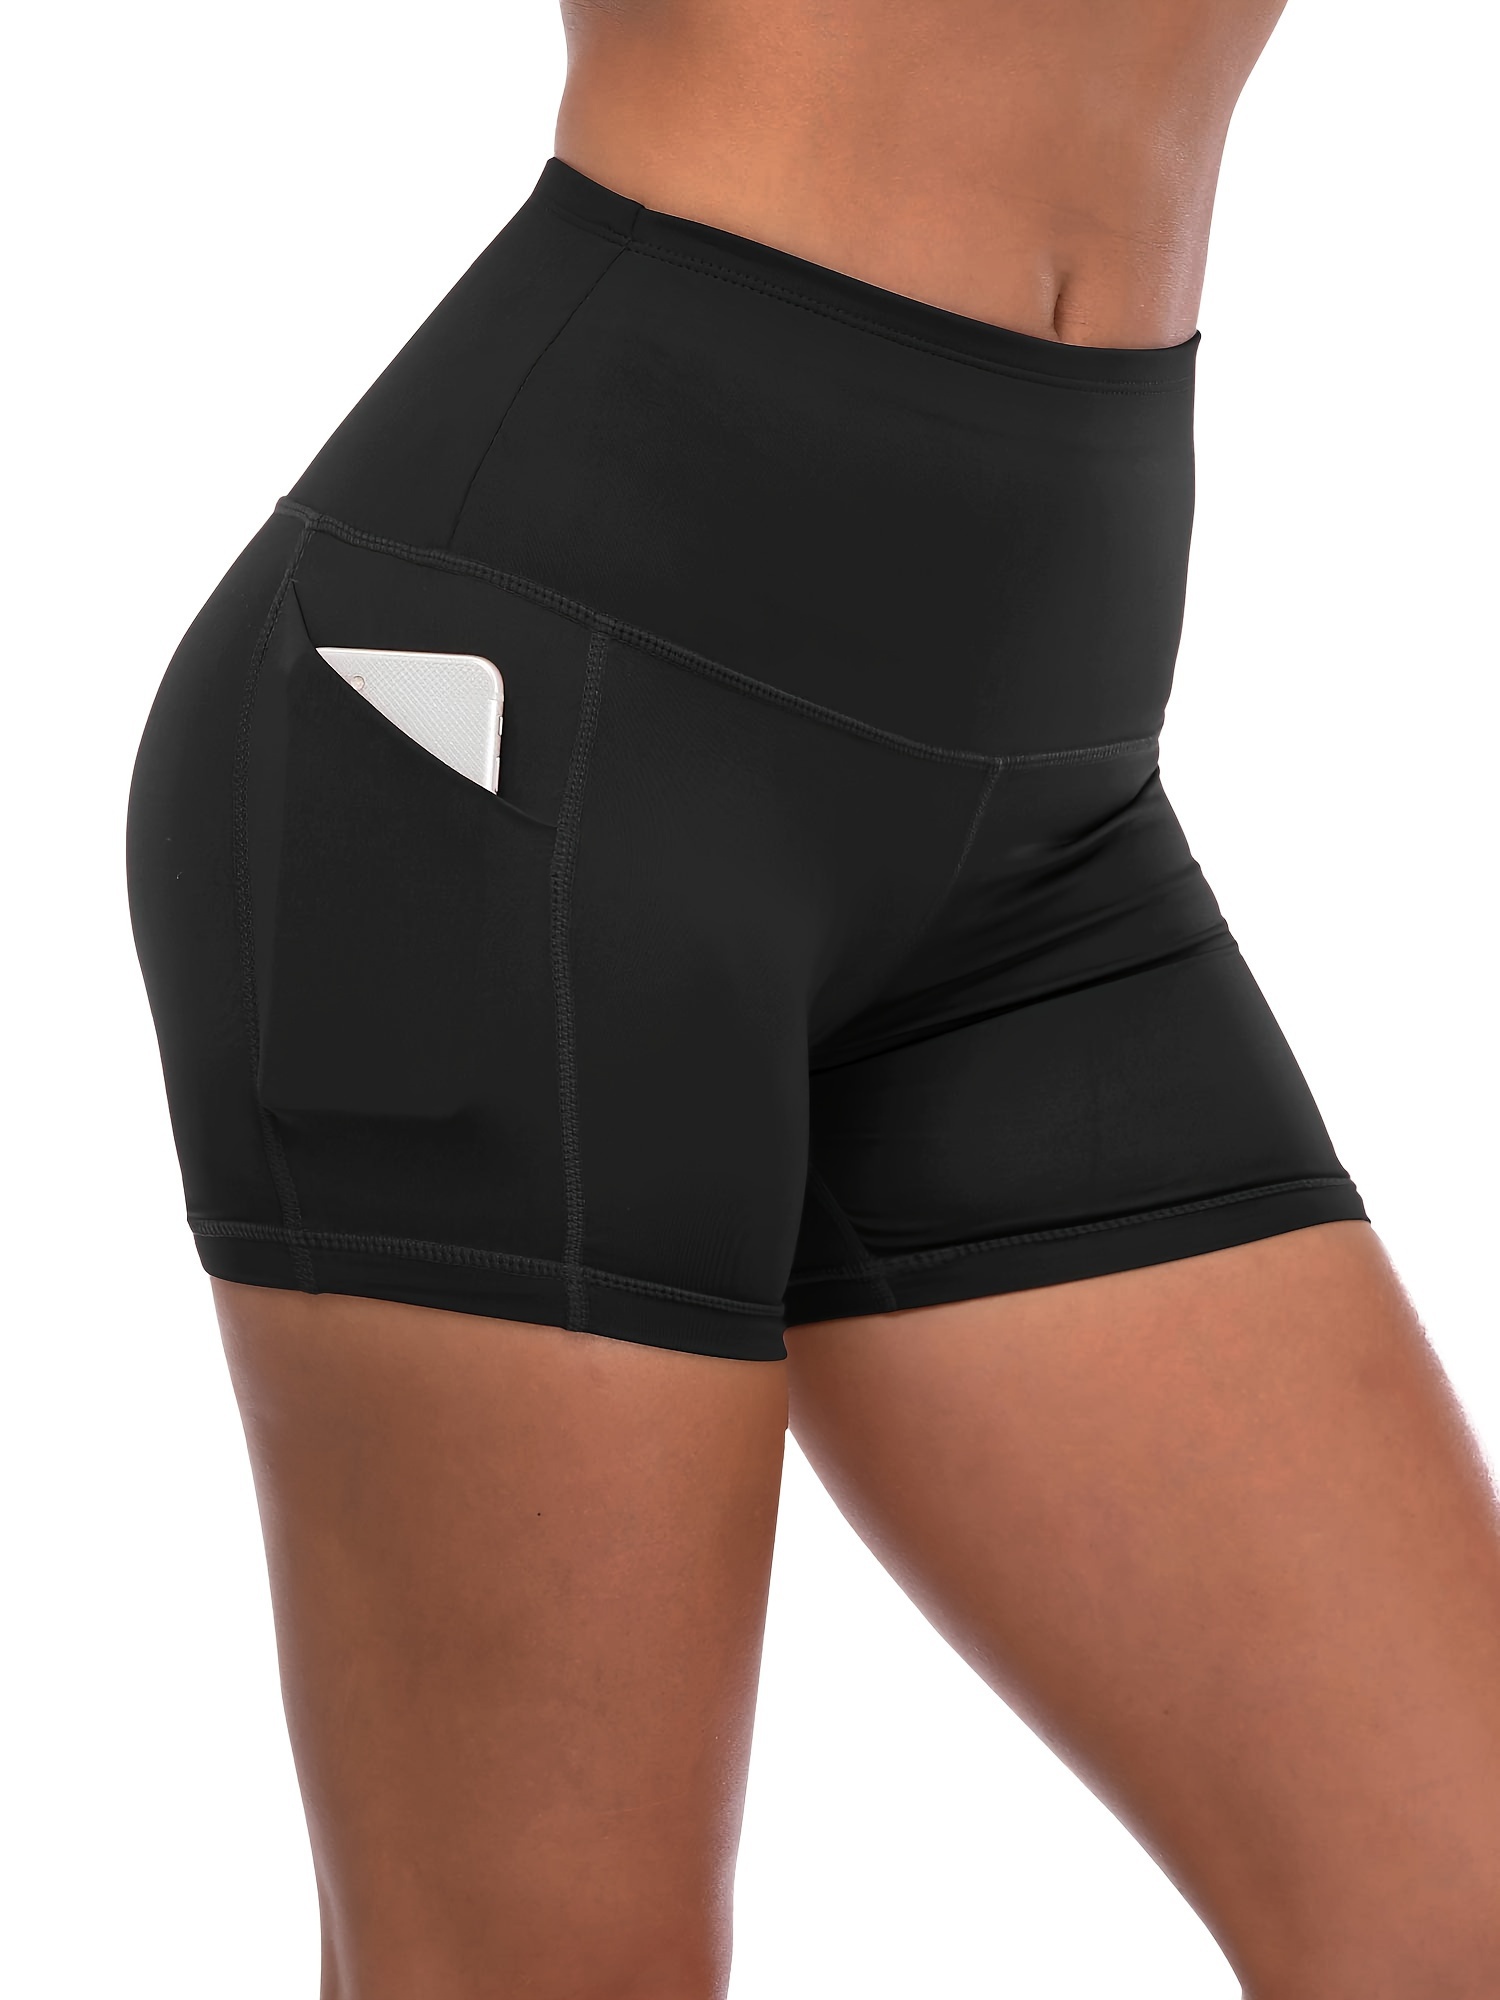 Yoga Shorts High Waisted Biker Shorts with Pockets Athletic Running Workout  for Womens